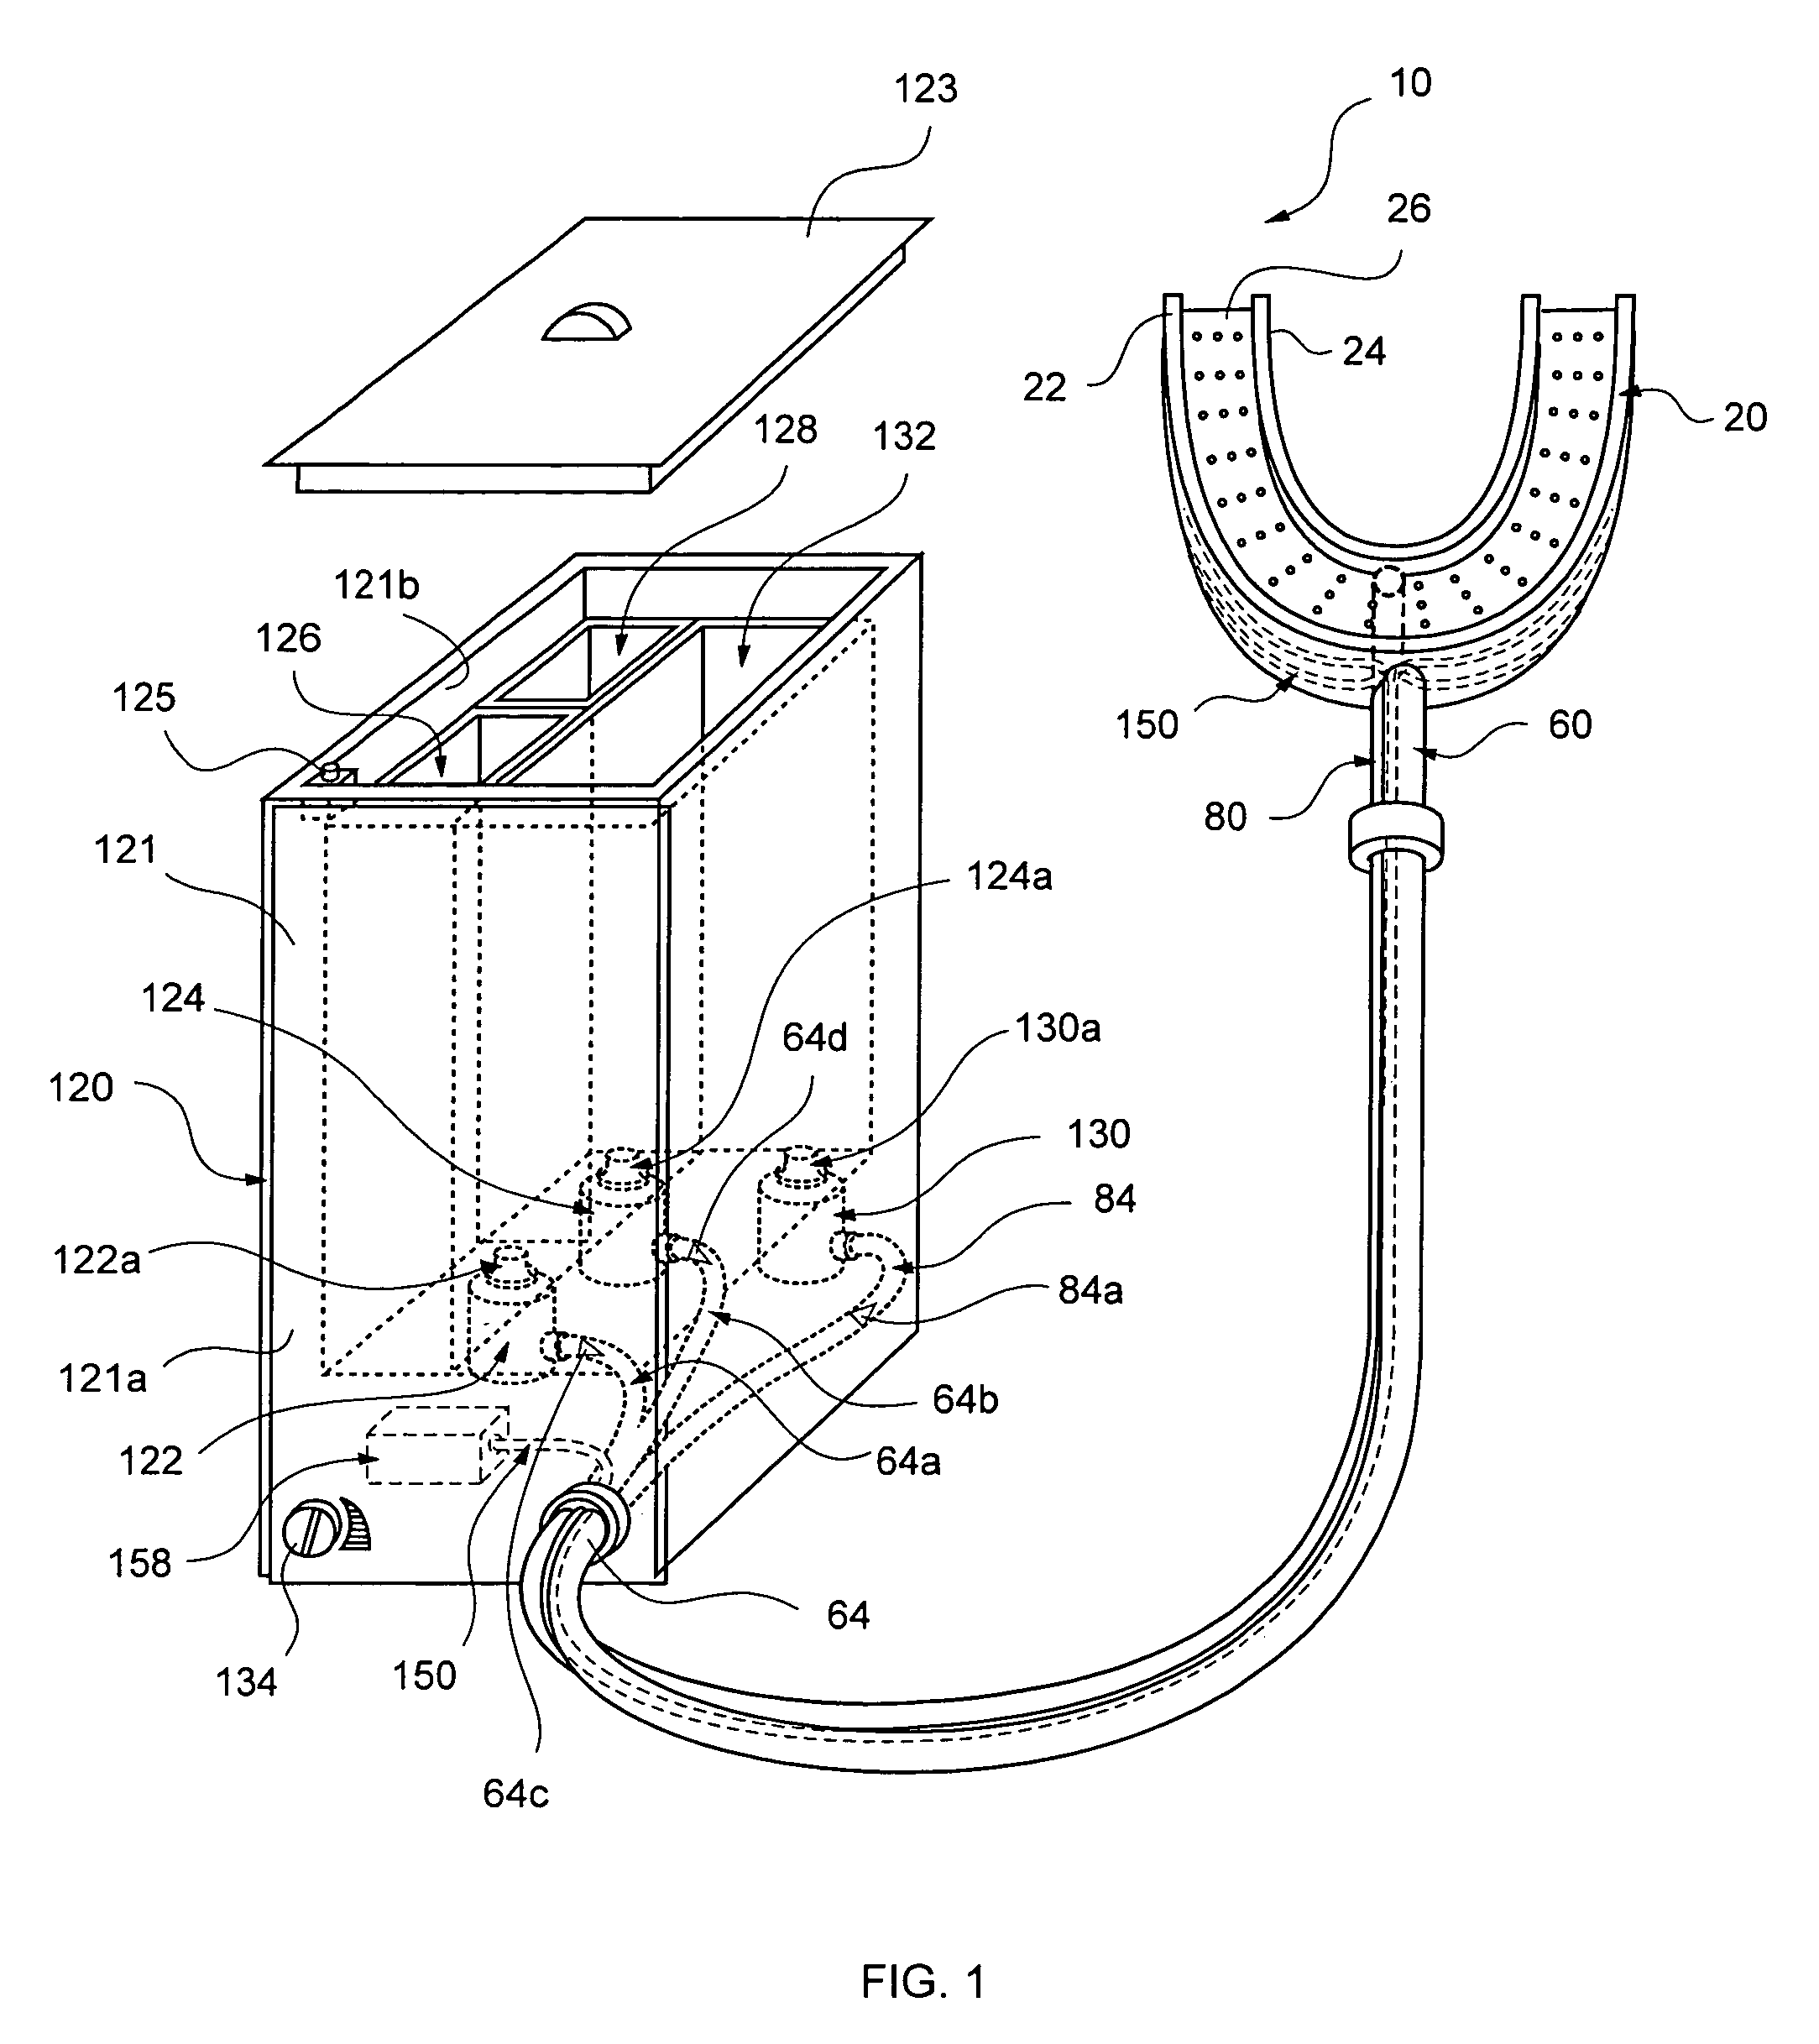 Oral hygiene device and method of use therefor